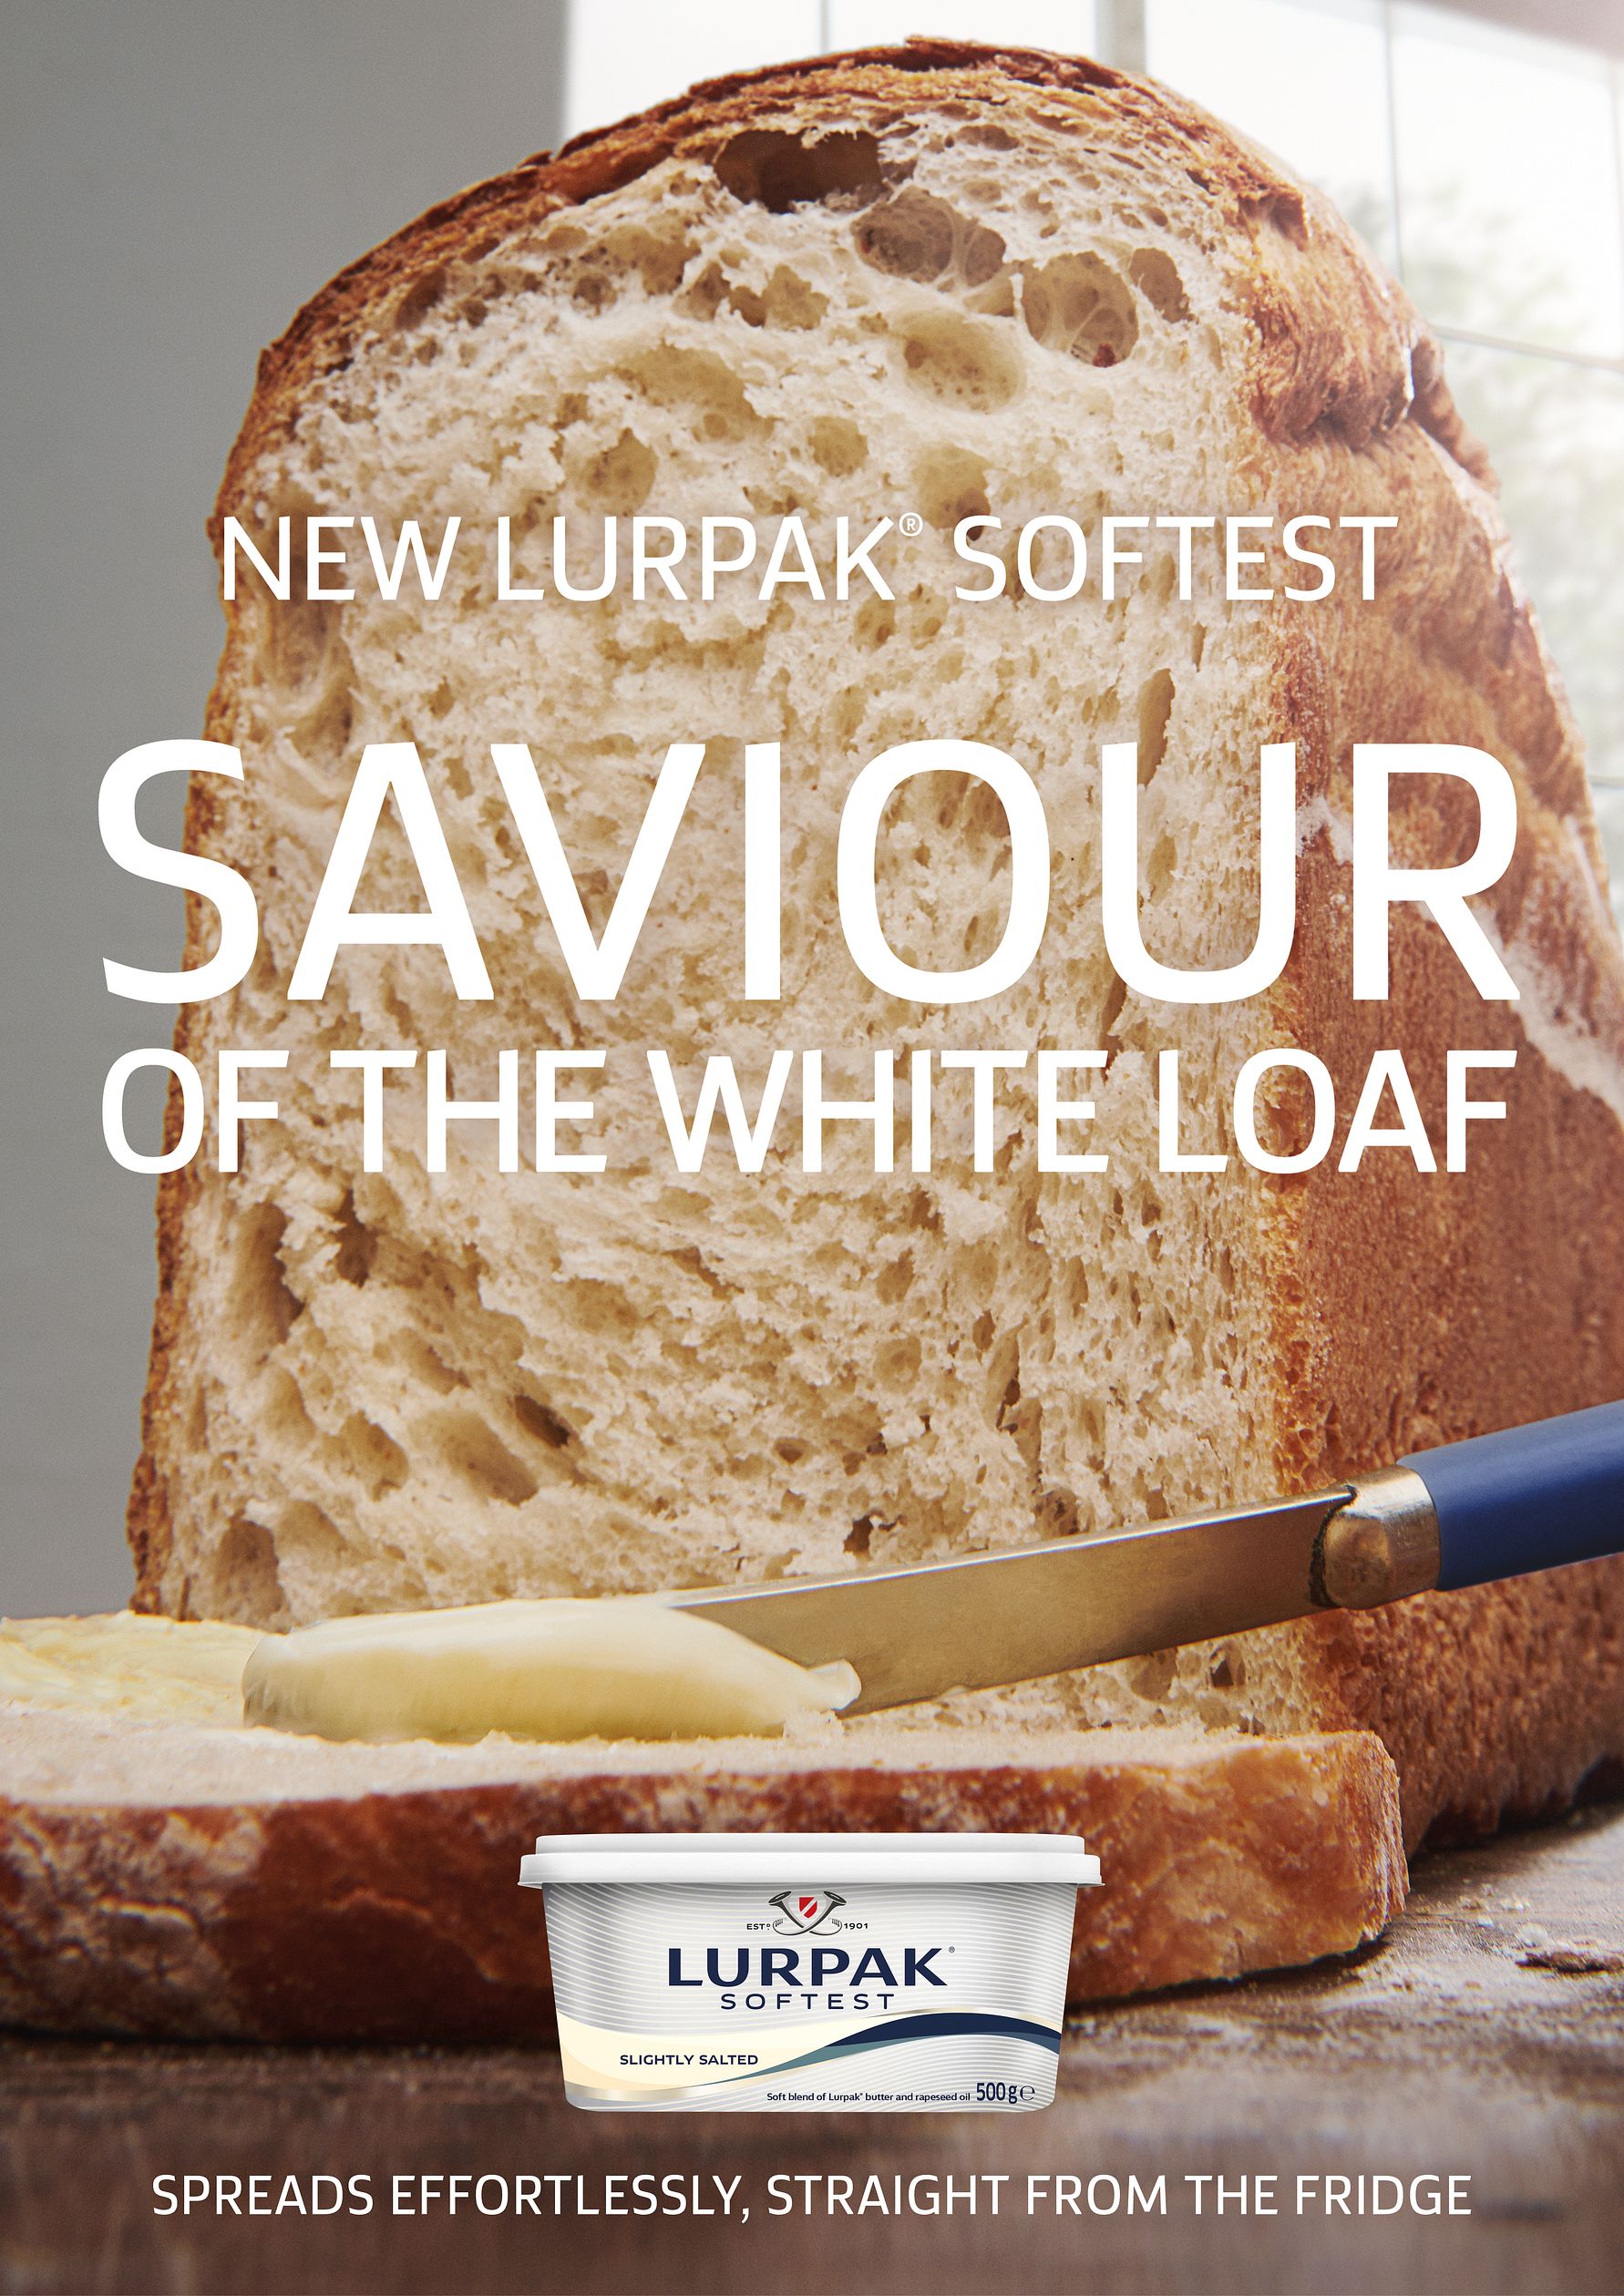 Lurpak combines taste and convenience for launch of new Softest